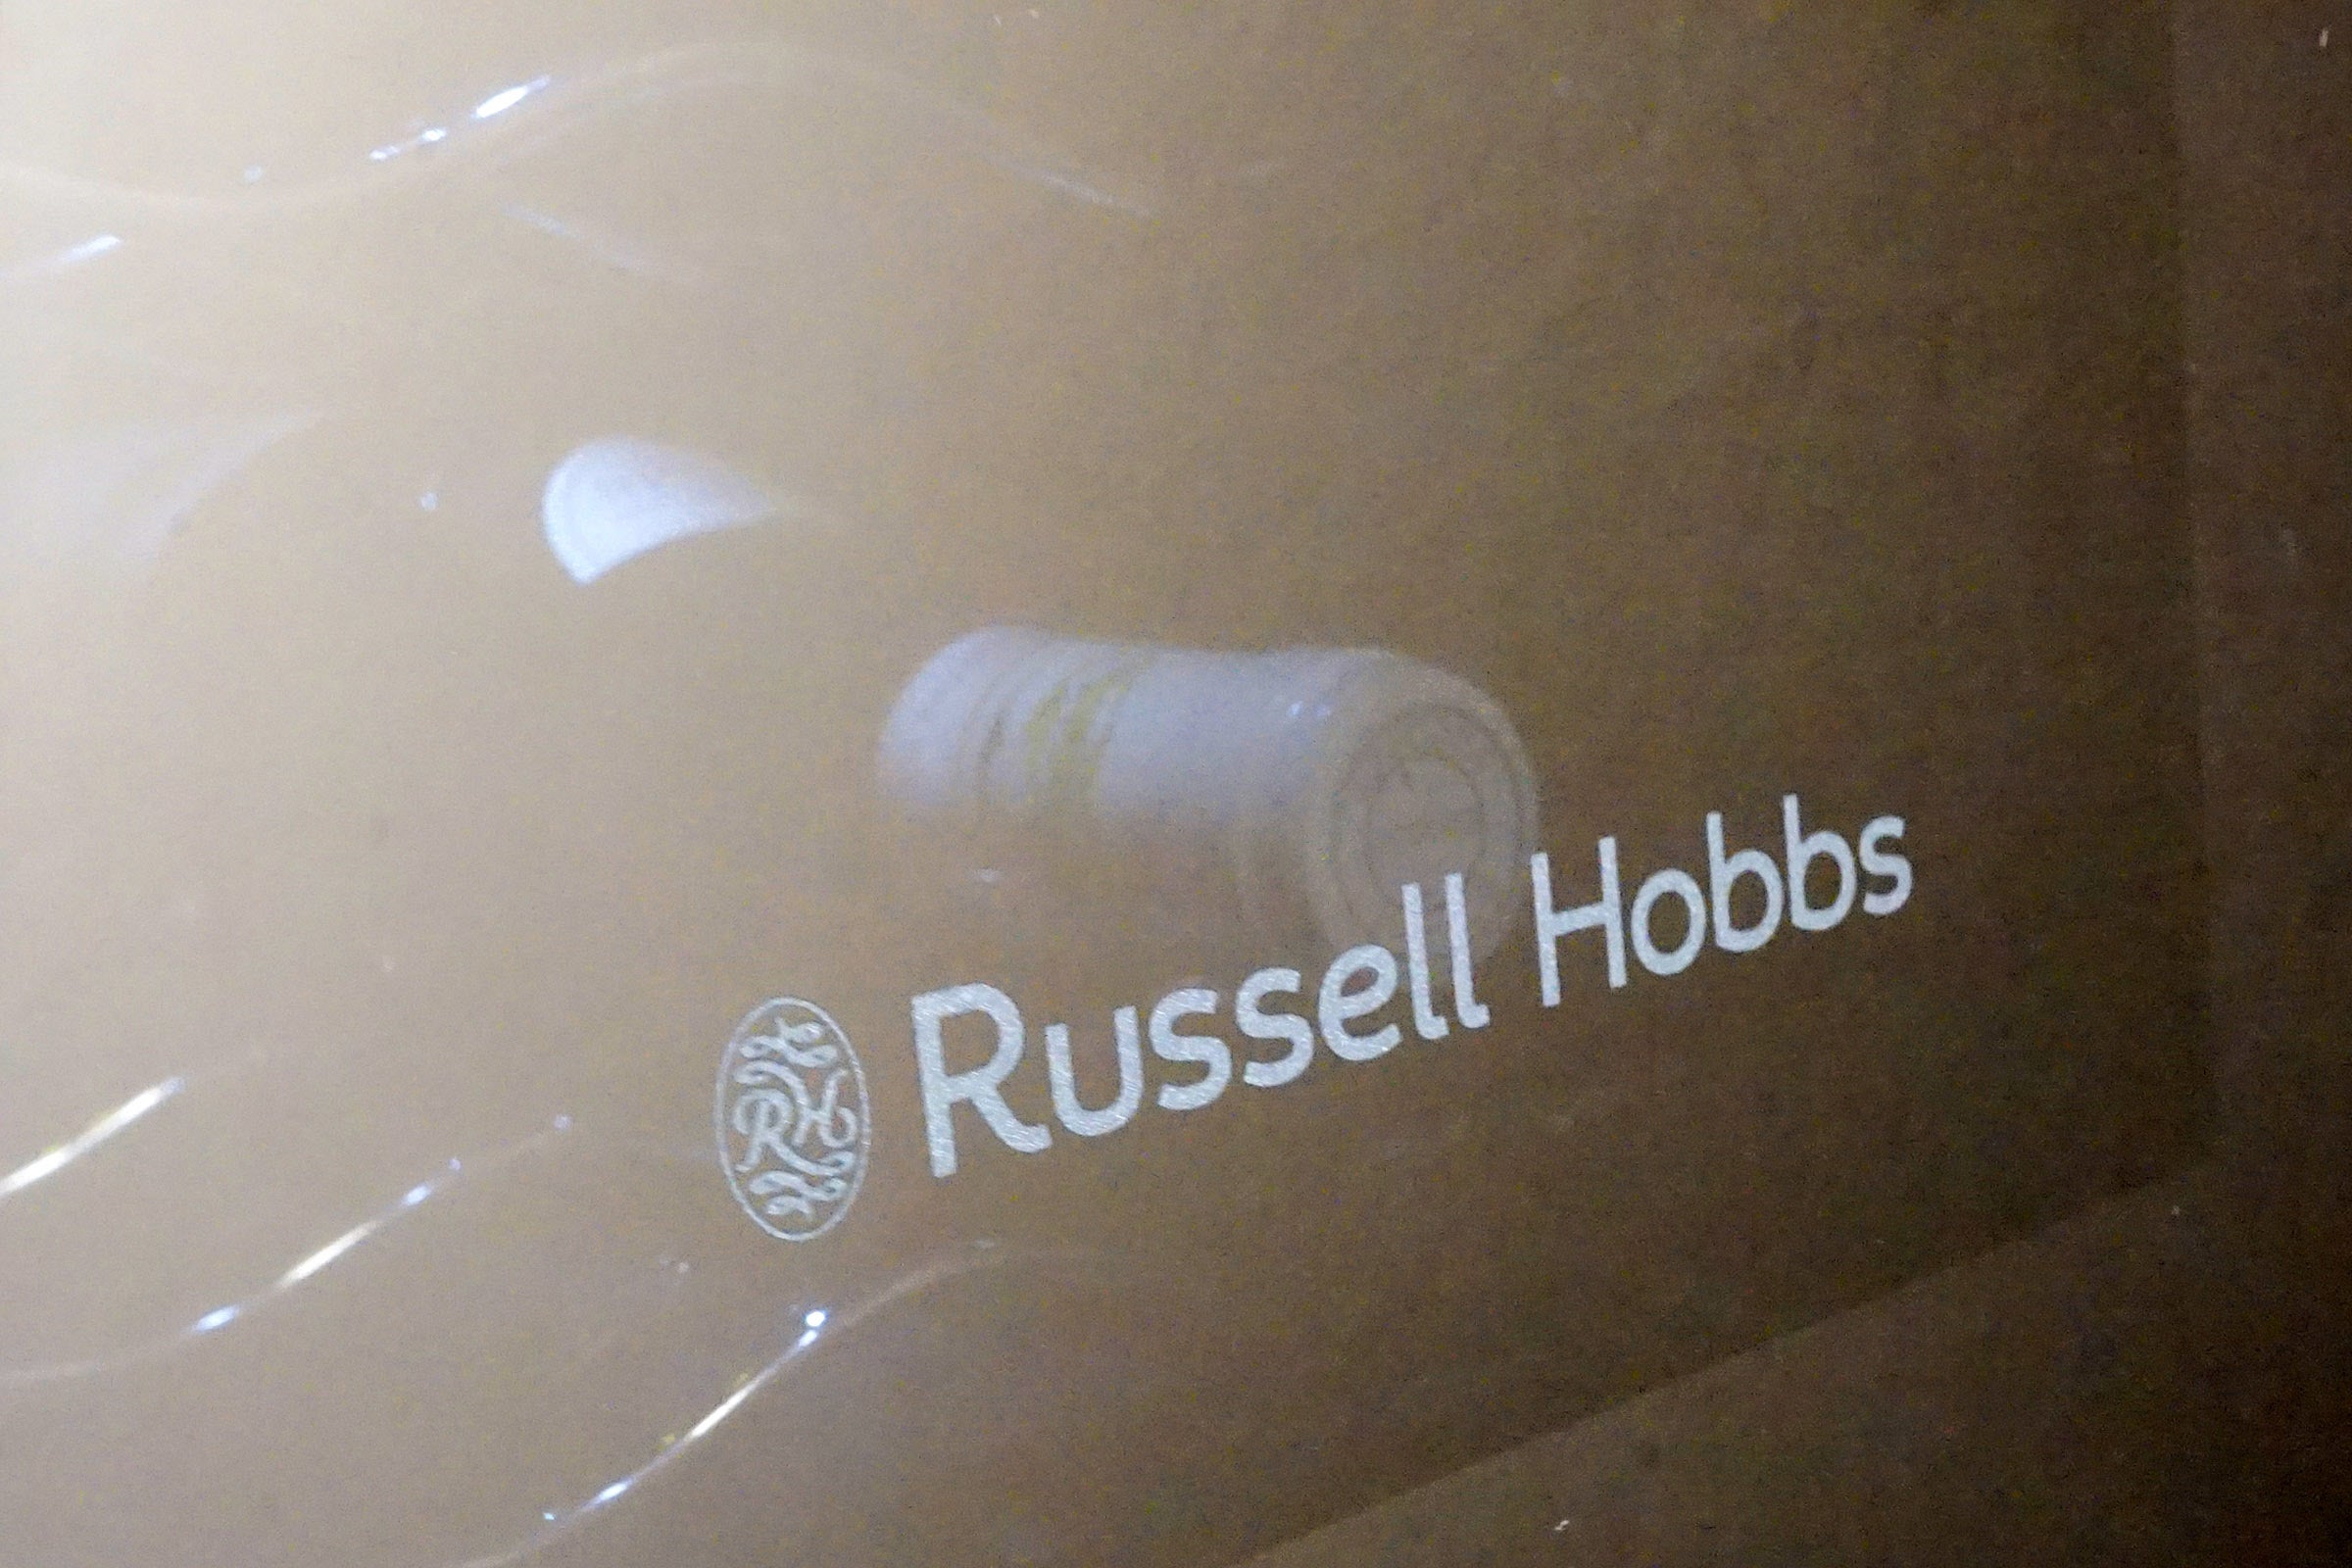 Close-up of Russell Hobbs logo on wine cooler.